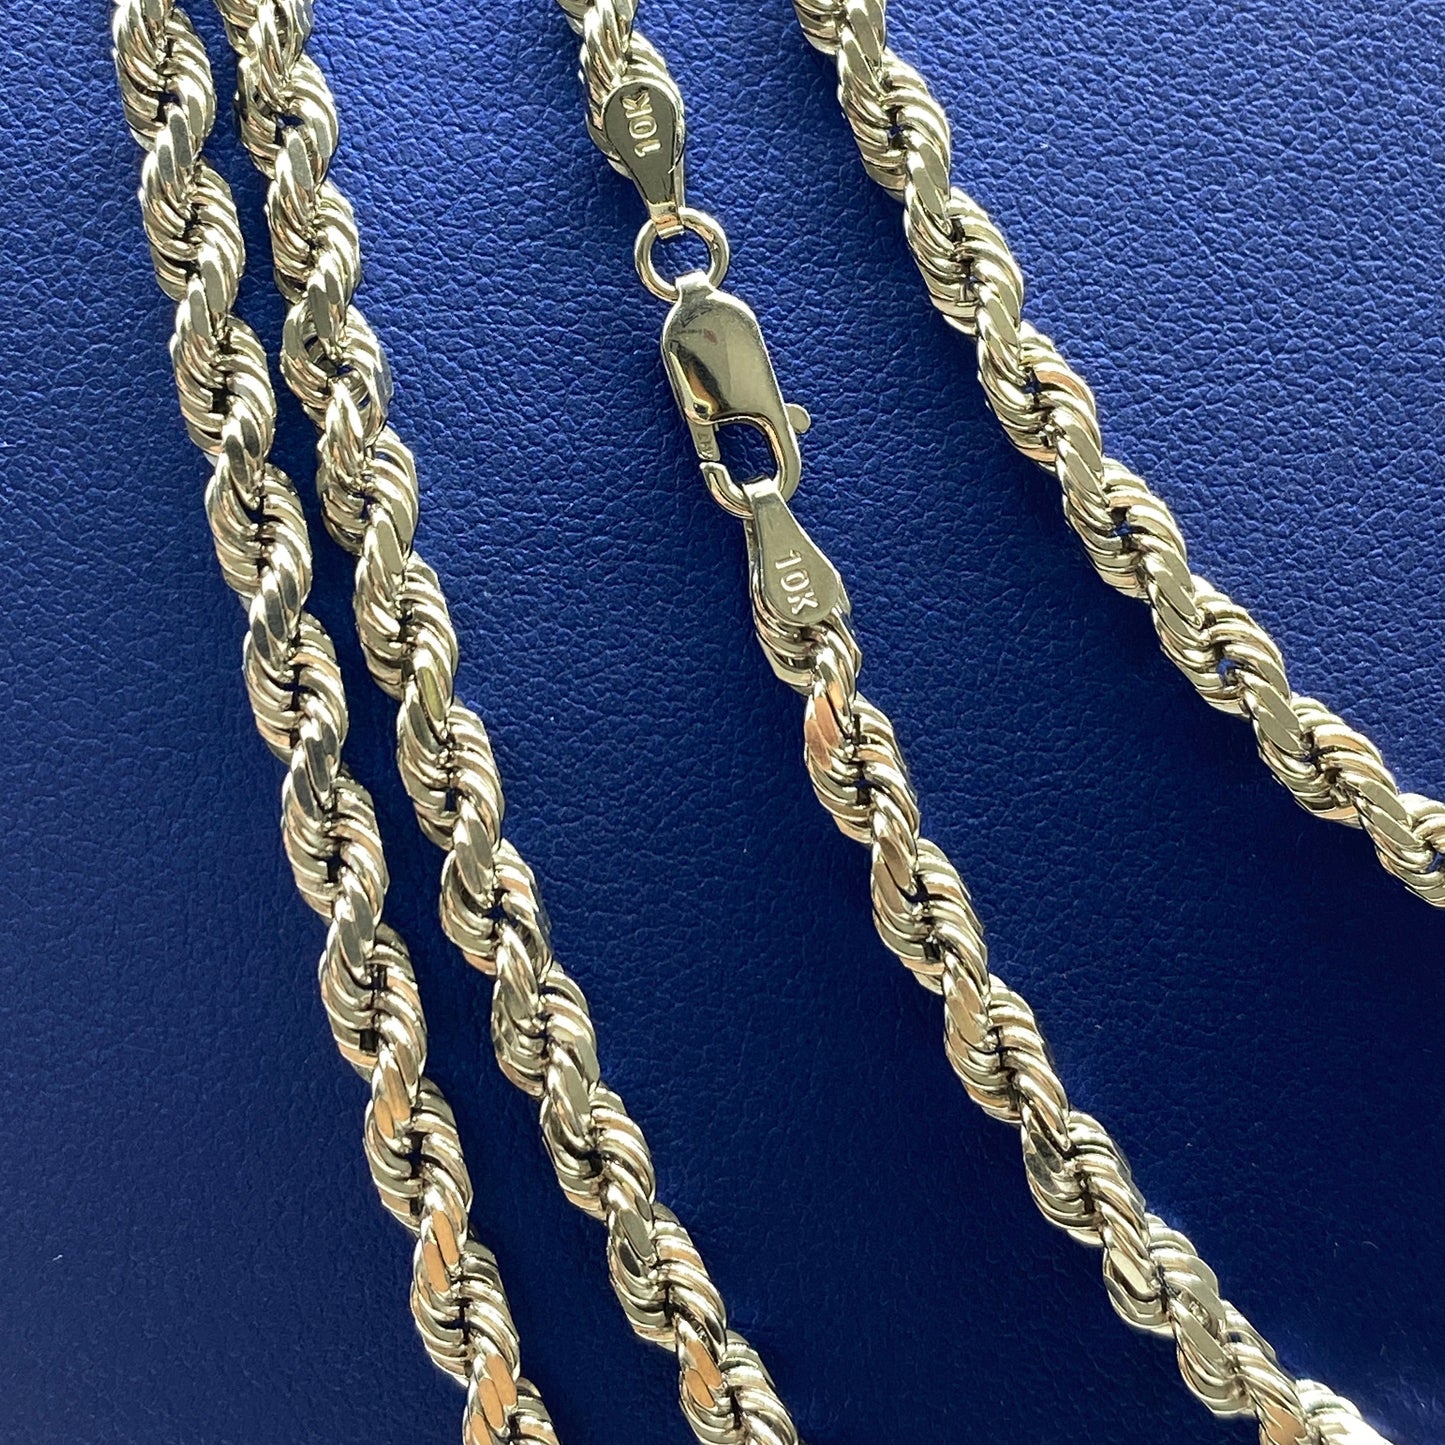 10K 4.0MM Rope Chain in White Gold 18-24"